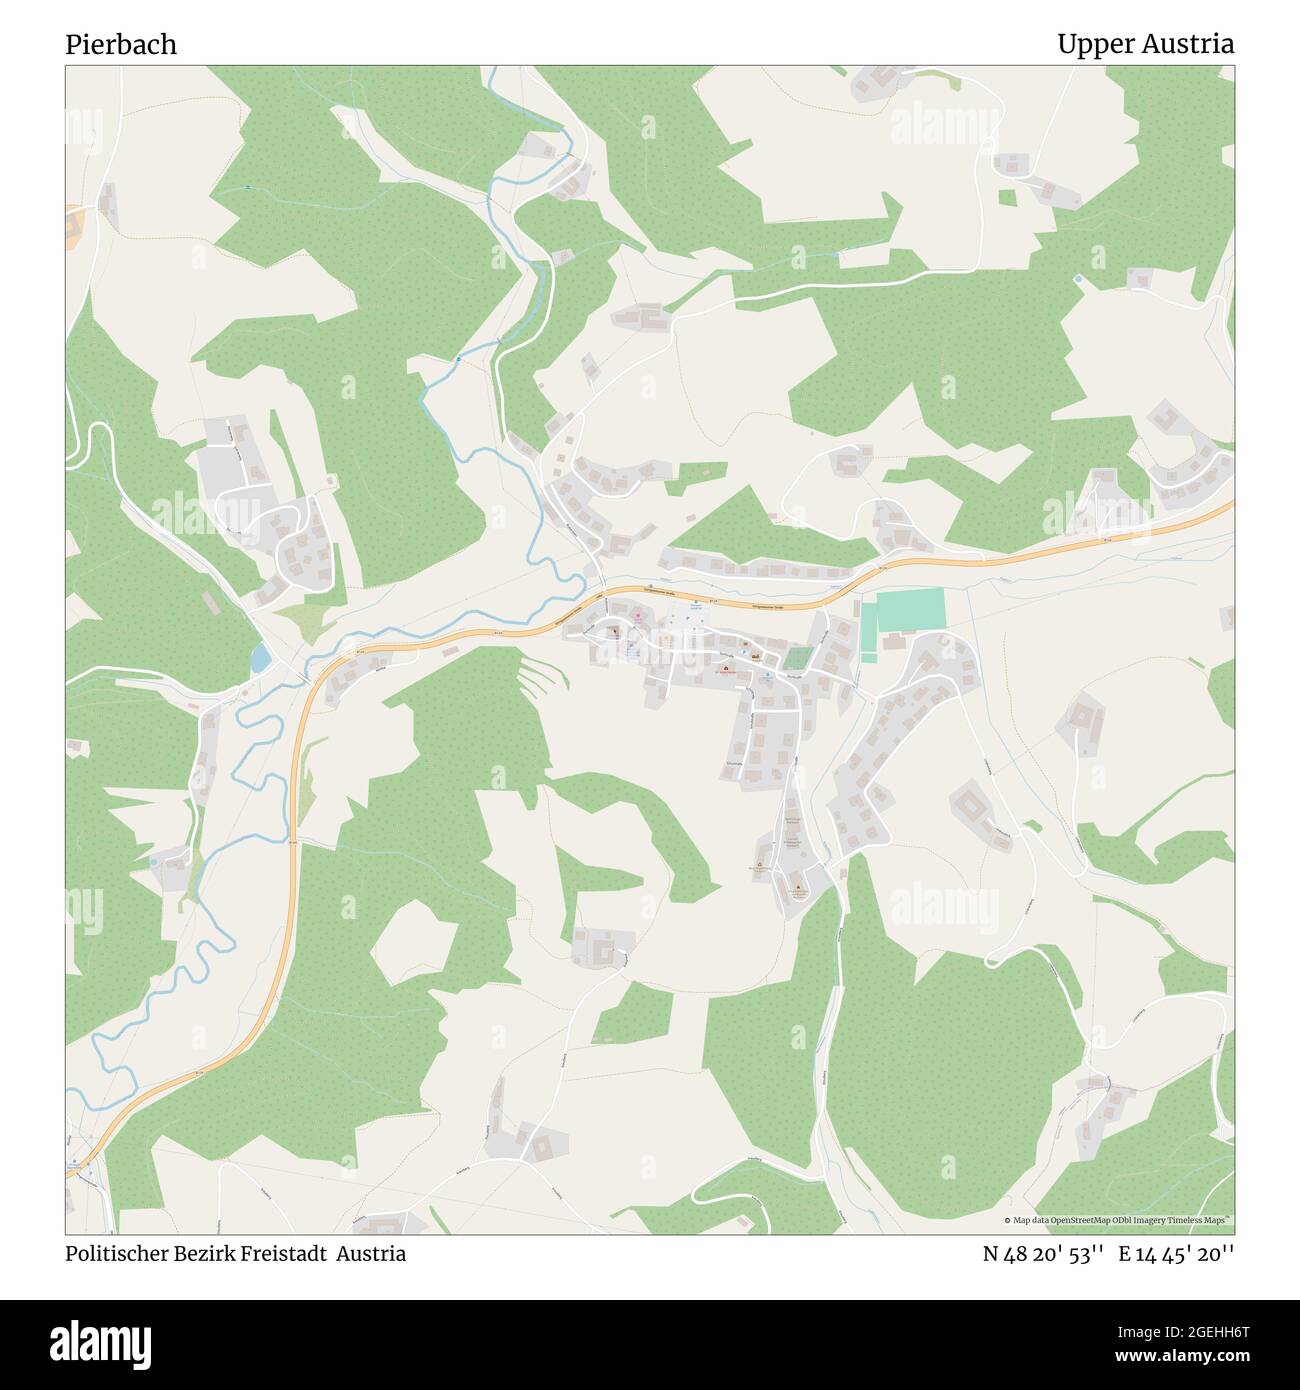 Pierbach, Politischer Bezirk Freistadt, Austria, Upper Austria, N 48 20' 53'', E 14 45' 20'', map, Timeless Map published in 2021. Travelers, explorers and adventurers like Florence Nightingale, David Livingstone, Ernest Shackleton, Lewis and Clark and Sherlock Holmes relied on maps to plan travels to the world's most remote corners, Timeless Maps is mapping most locations on the globe, showing the achievement of great dreams Stock Photo